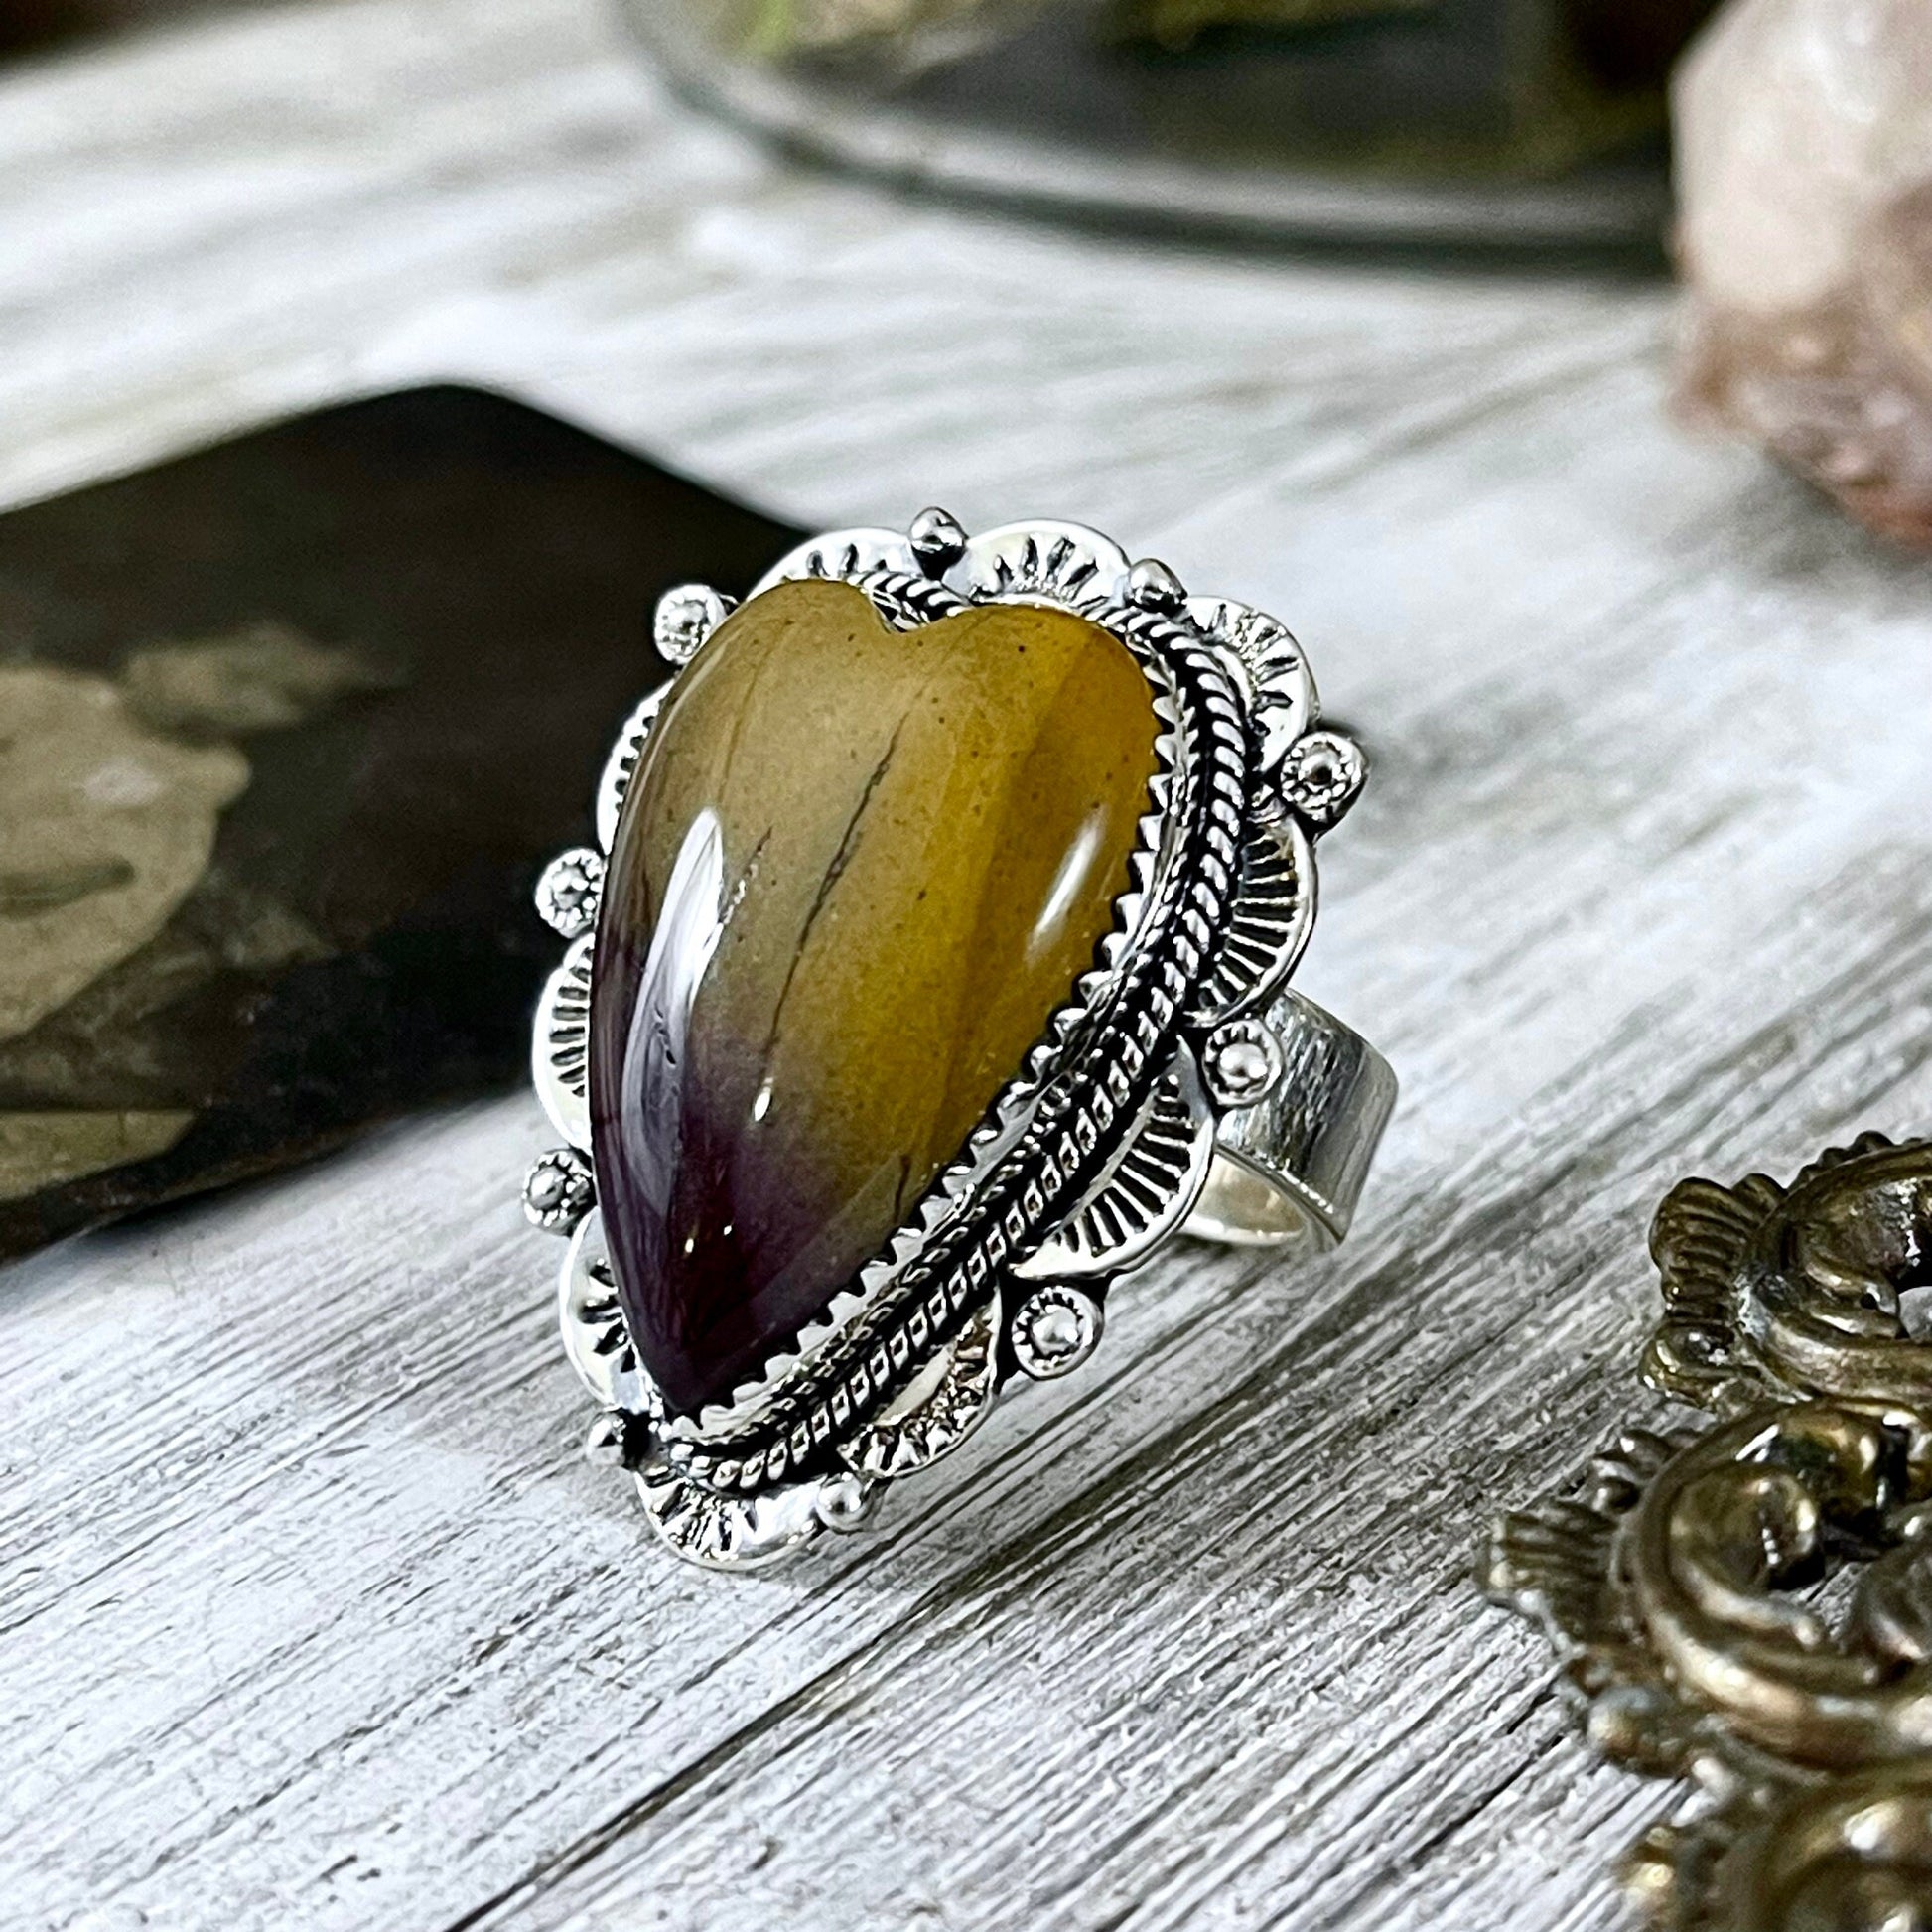 Big Bold Jewelry, Big Crystal Ring, Big Ring, Big Stone Ring, Bohemian Ring, boho jewelry, boho ring, crystal ring, Etsy ID: 1151584679, Foxlark Alchemy, FOXLARK- RINGS, gypsy ring, Jewelry, Large Ring, Mookaite Heart, Rings, Statement Ring, Statement Rin